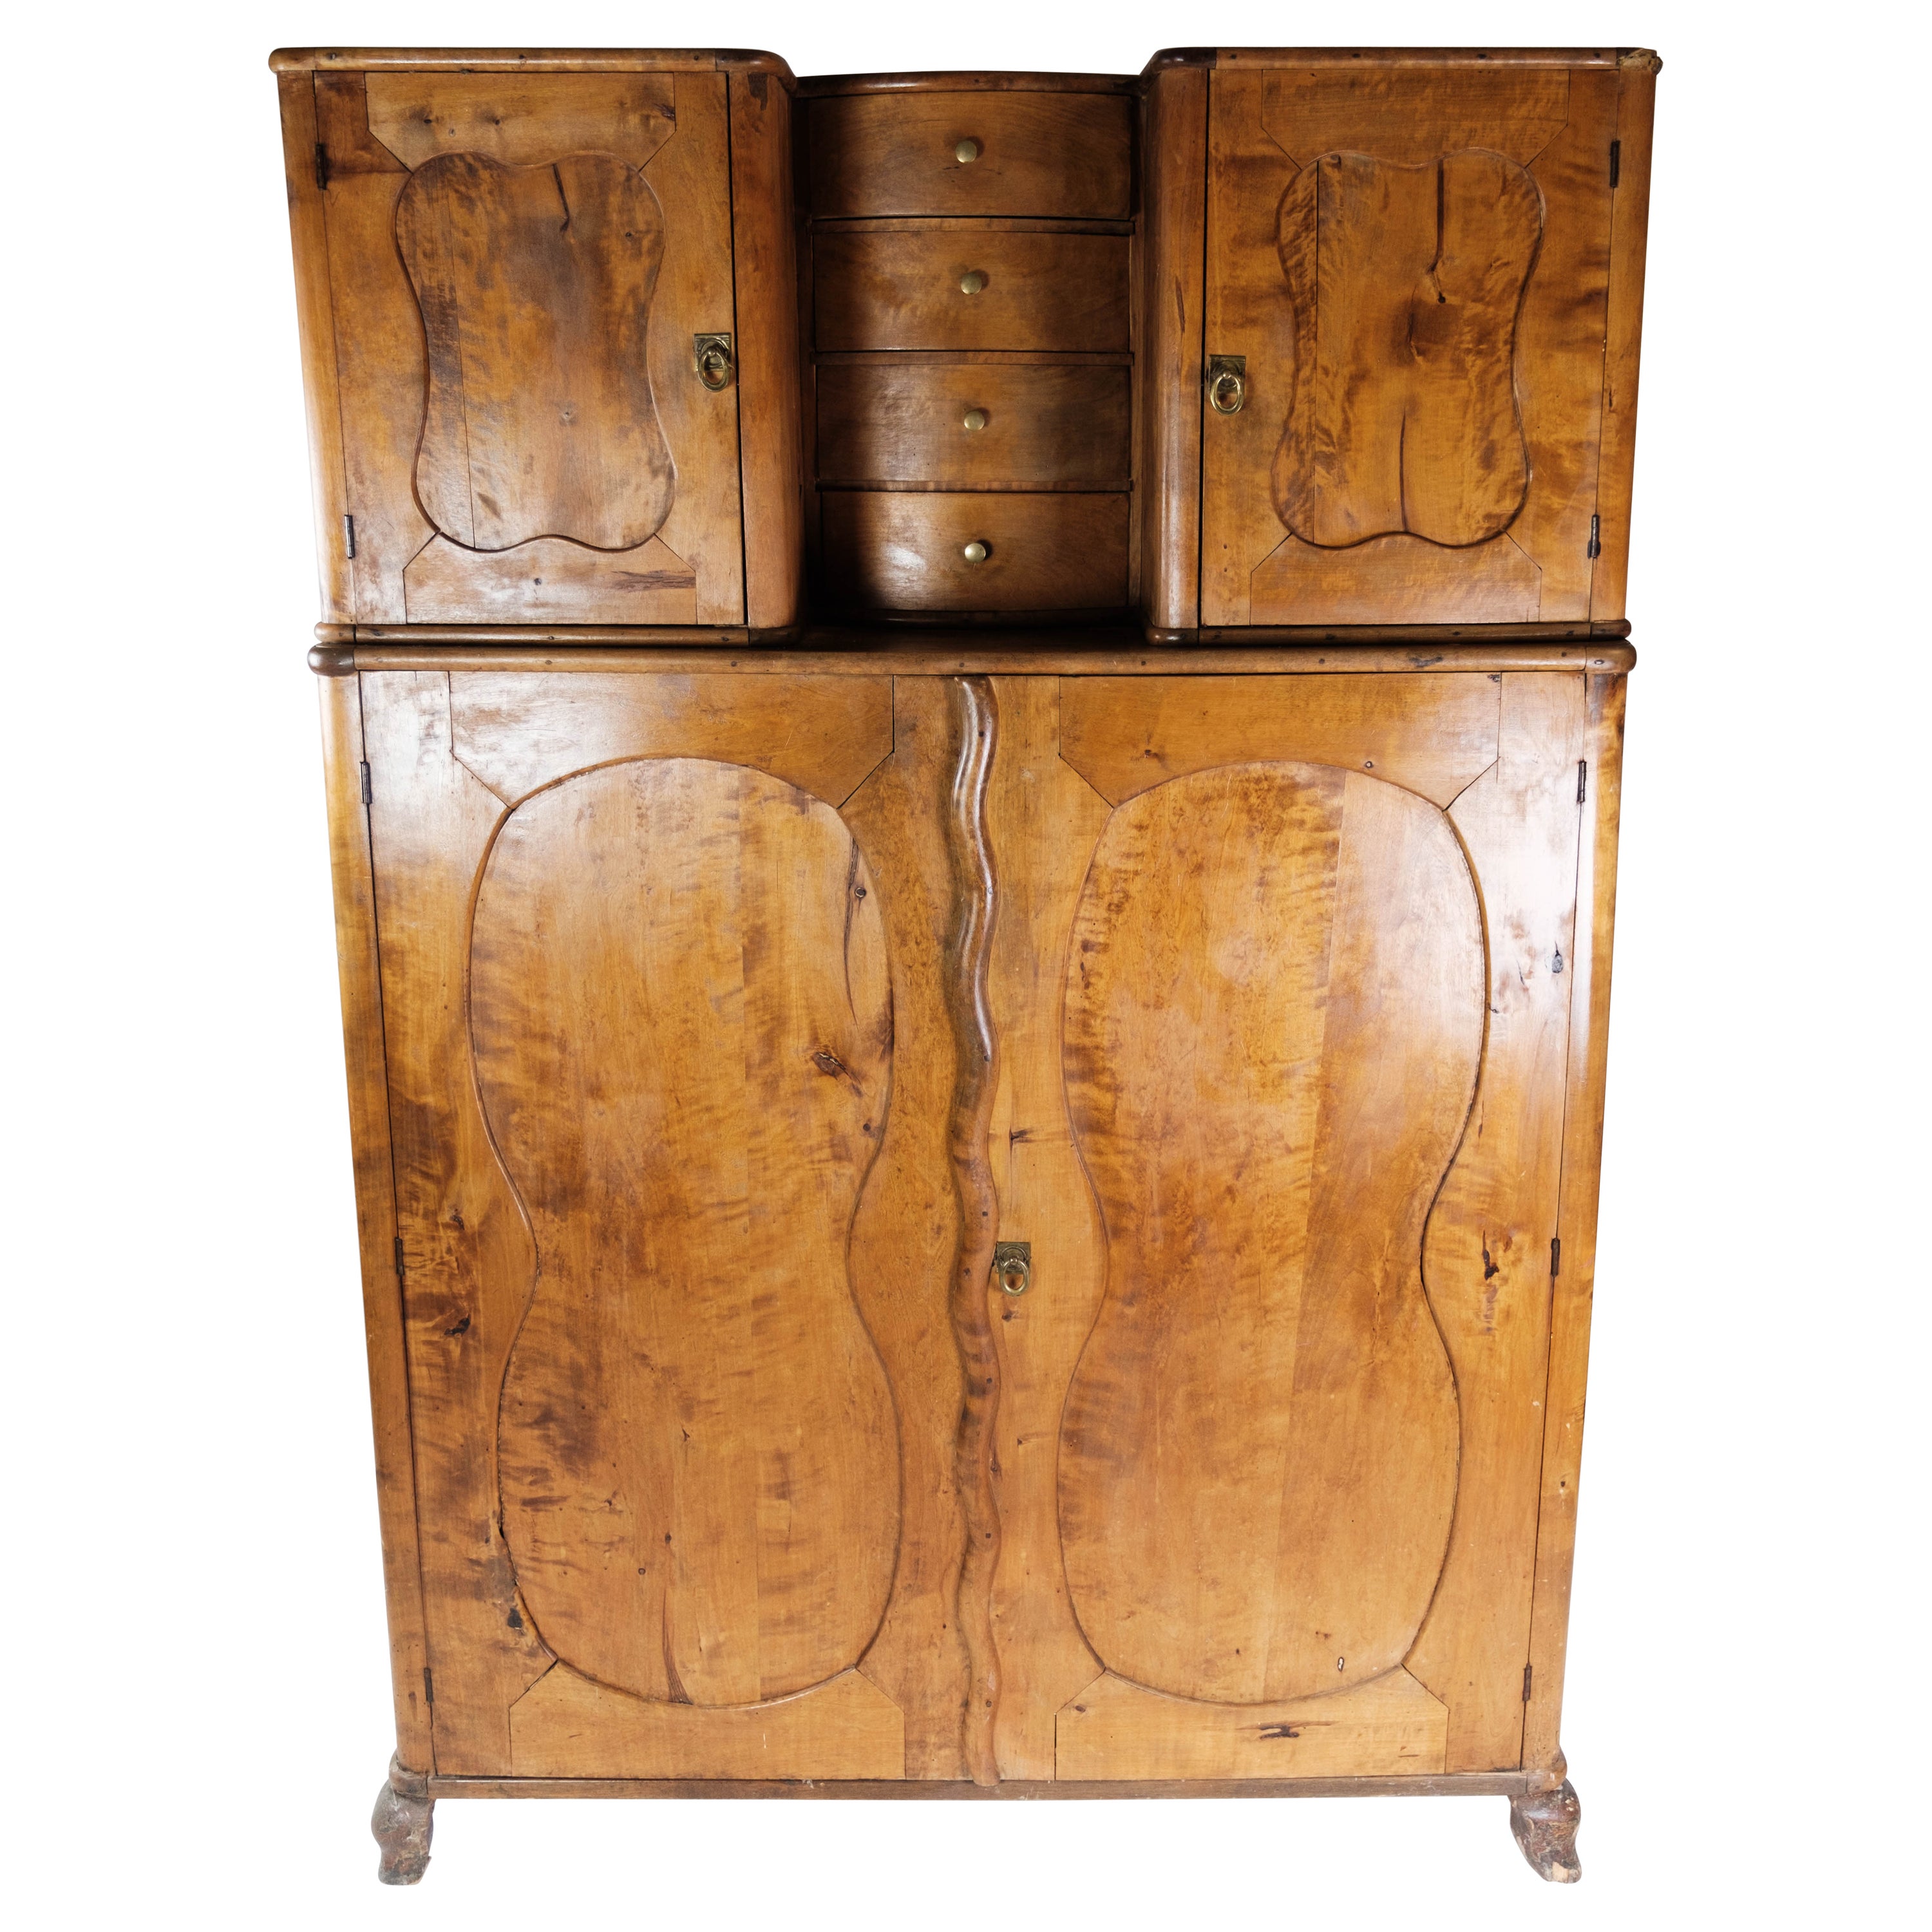 Tall Cabinet of Birch Wood, in Great Antique Condition from 1860